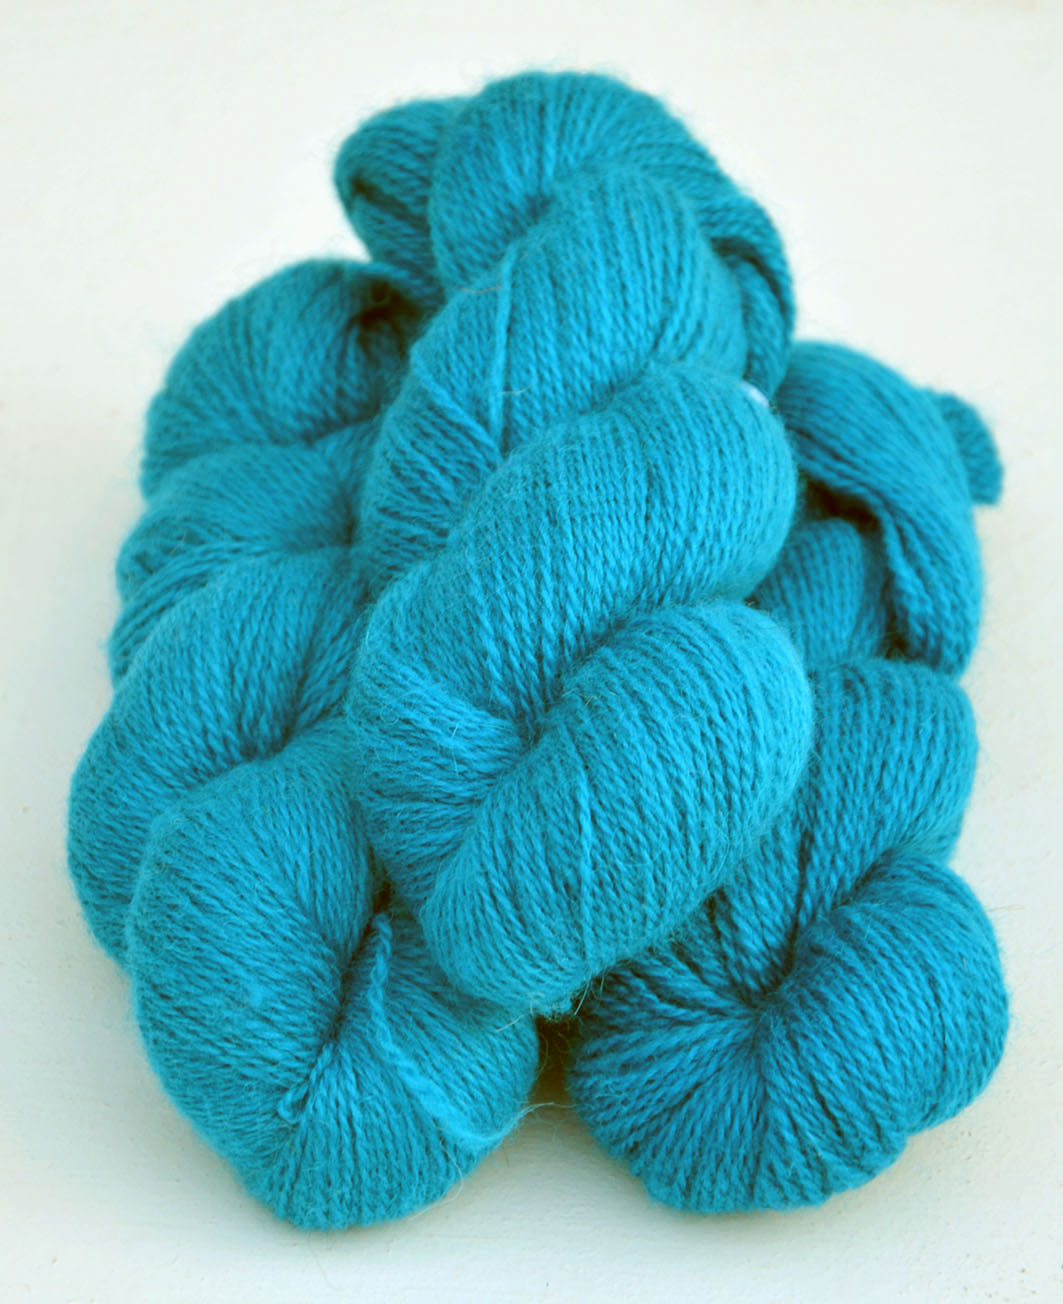 6/2-4101 Turquoise on White Wool